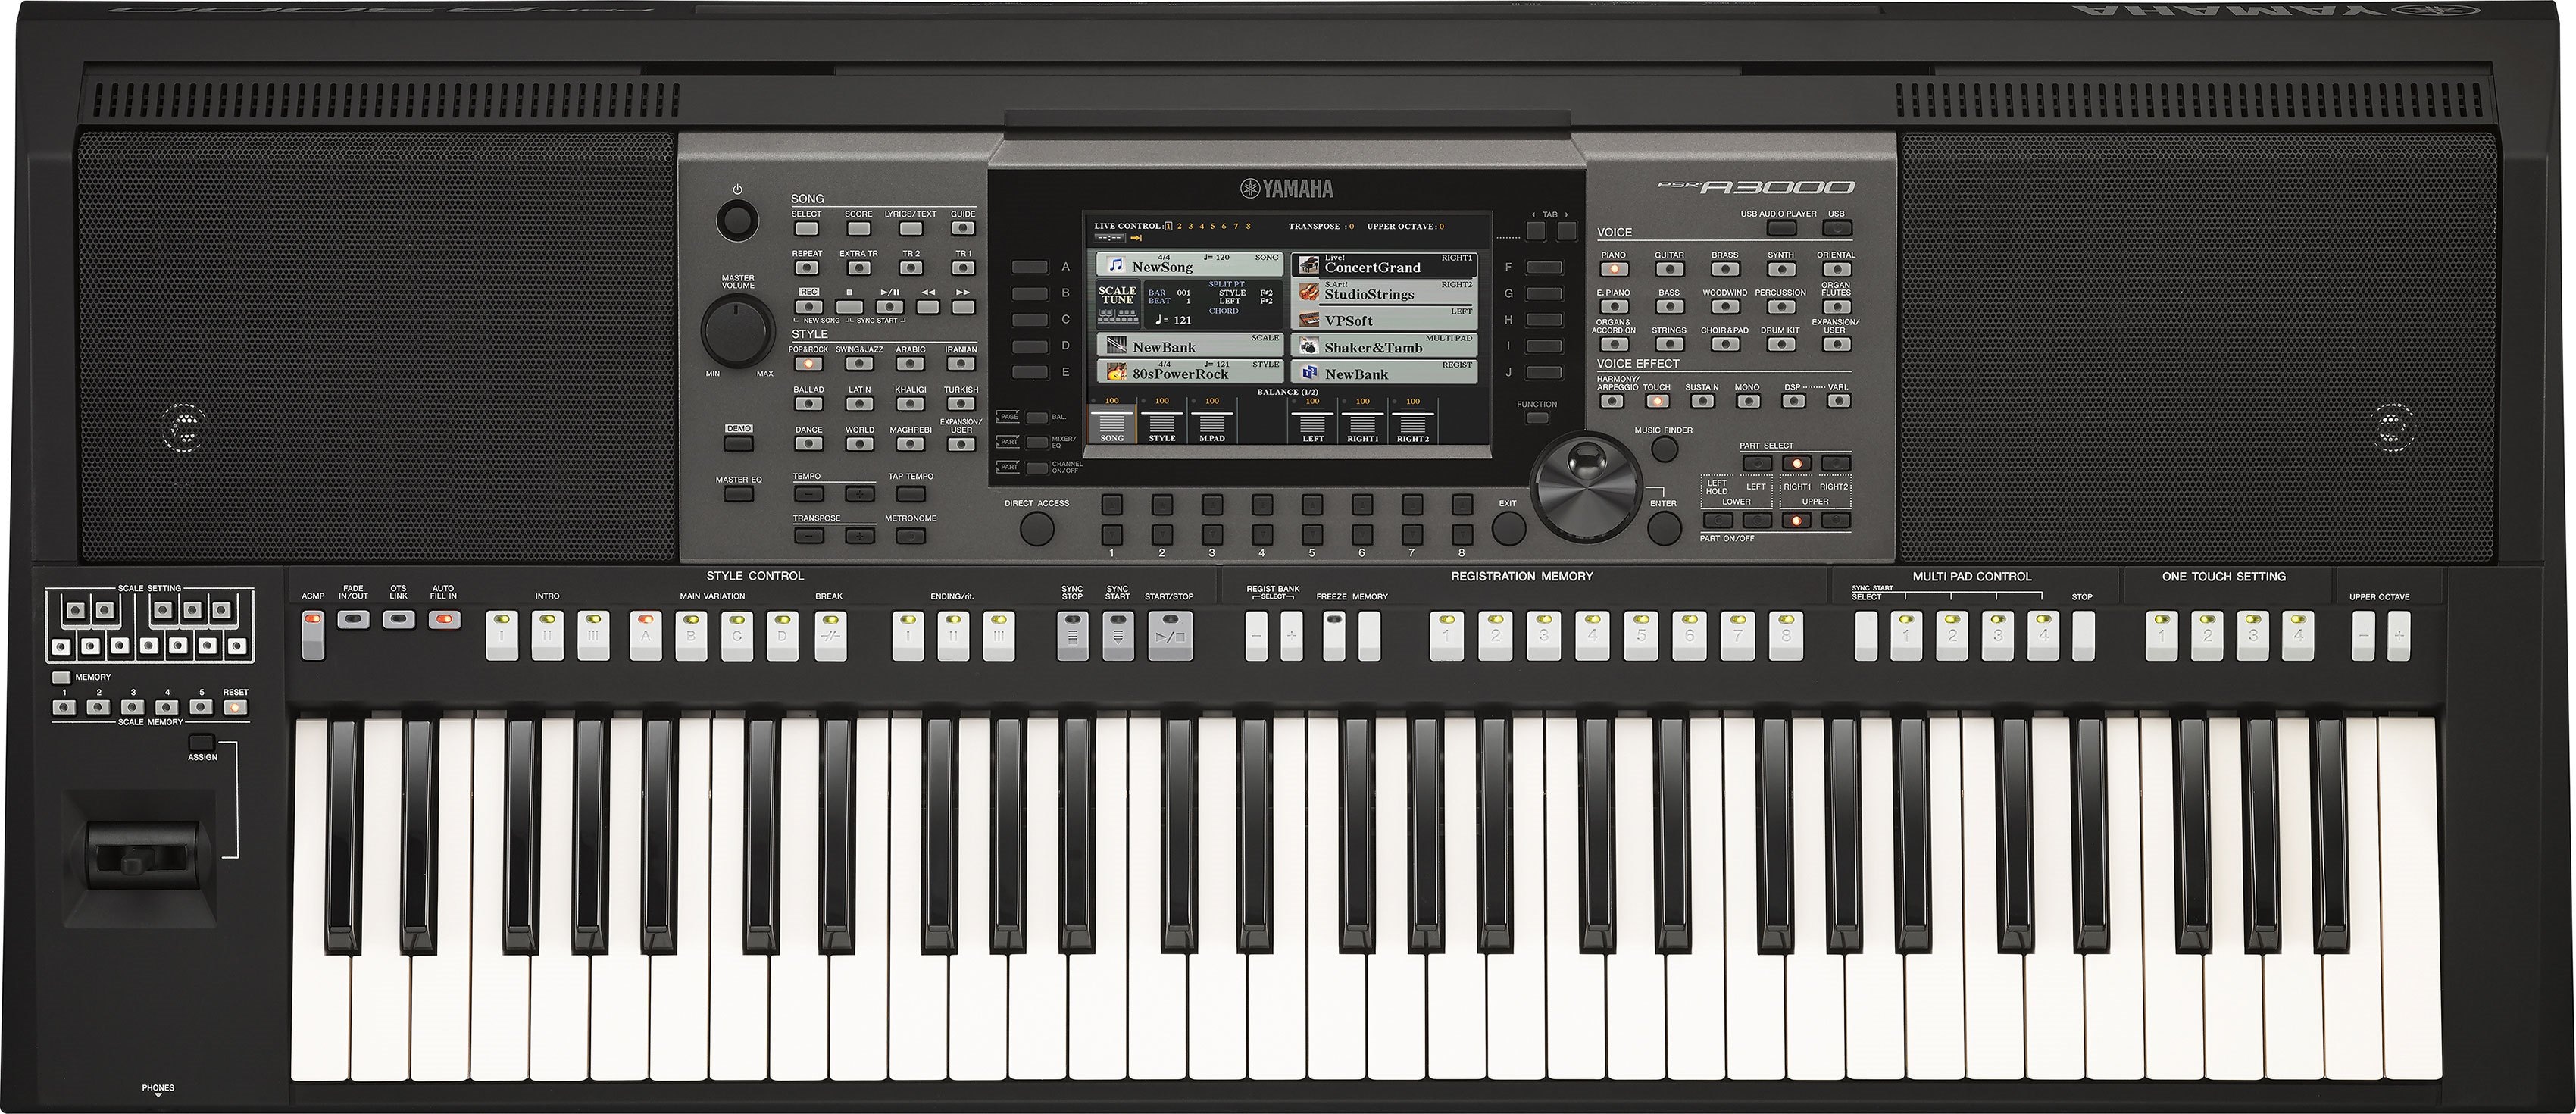 PSR-A3000 - Overview - Digital and Arranger Workstations - Keyboard Instruments - Musical Products Yamaha USA